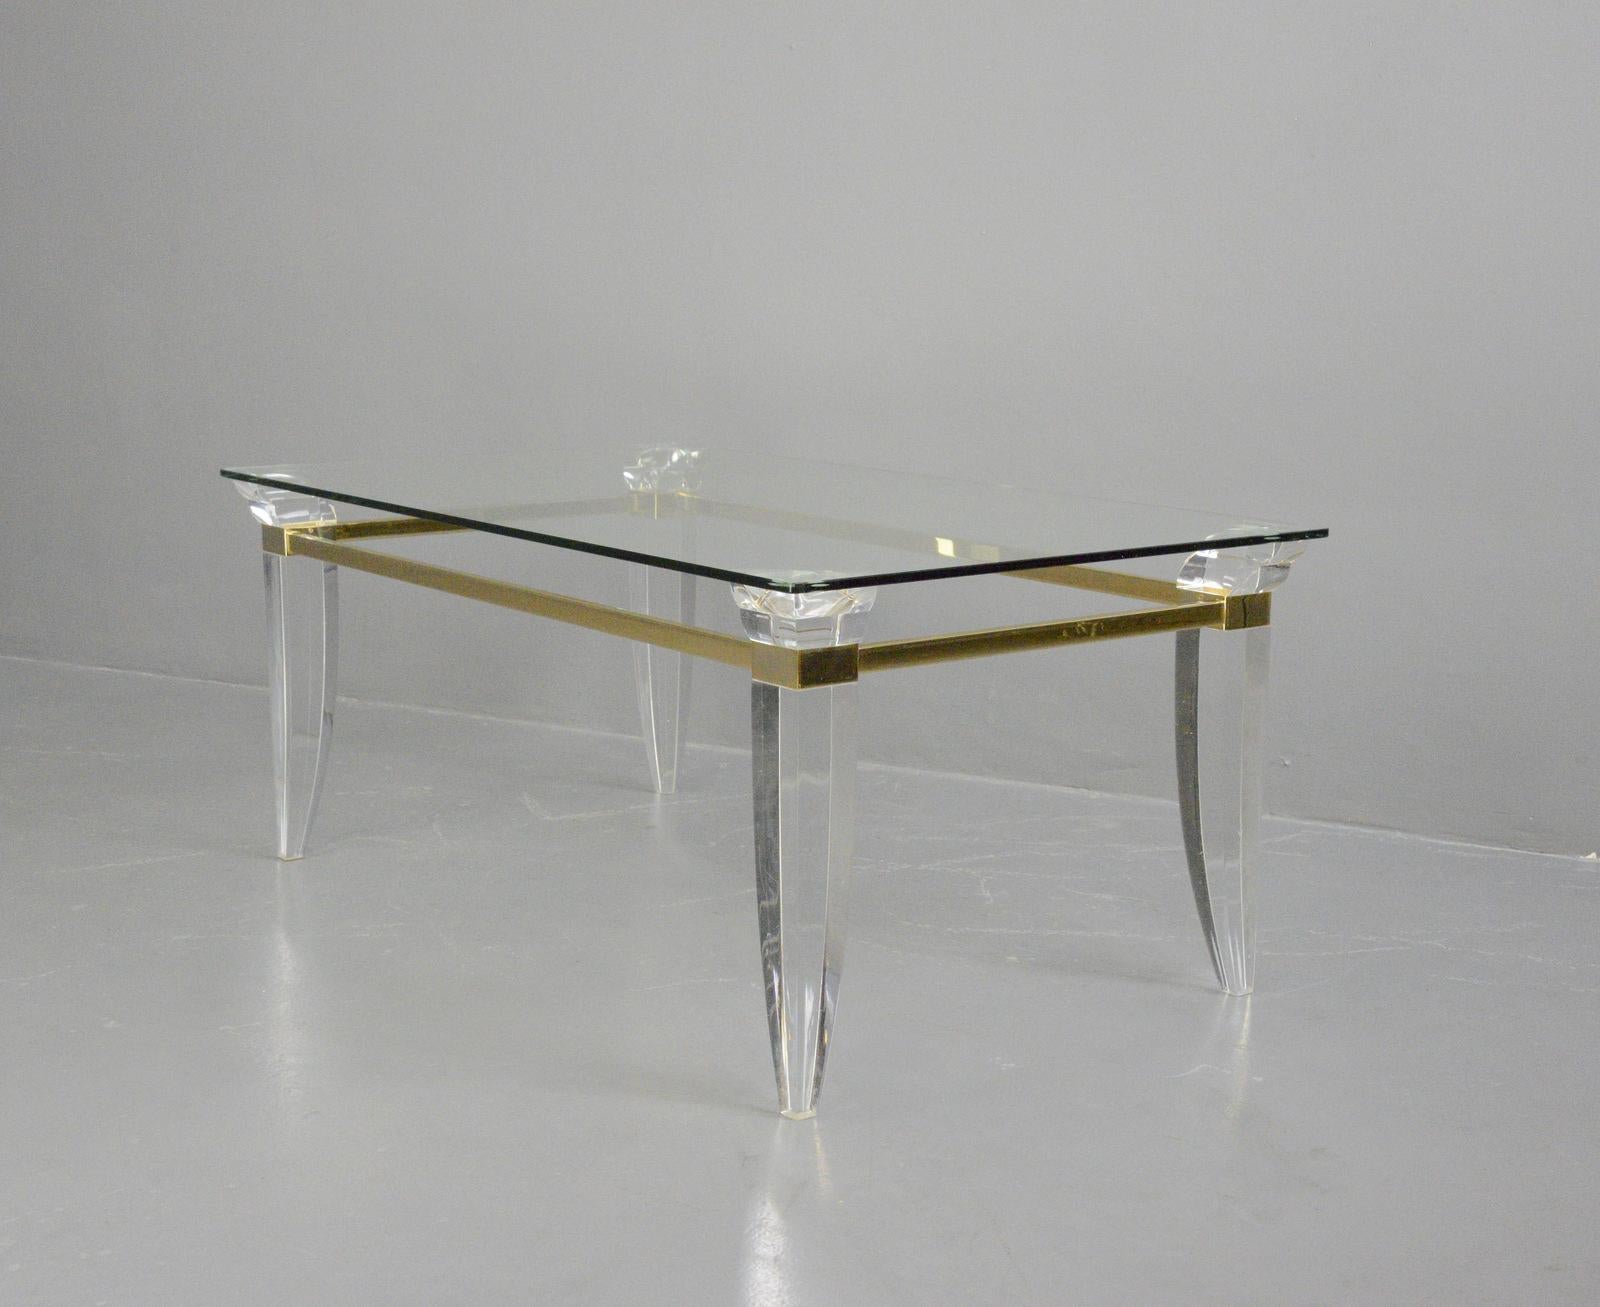 Brass & lucite coffee table Circa 1970s

- Swept Lucite legs
- Brass banding detail
- Toughened glass top
- French ~ 1970s
- Measures: 120cm long x 70cm deep x 51cm tall

Condition report

Some scratches to the glass top in places.